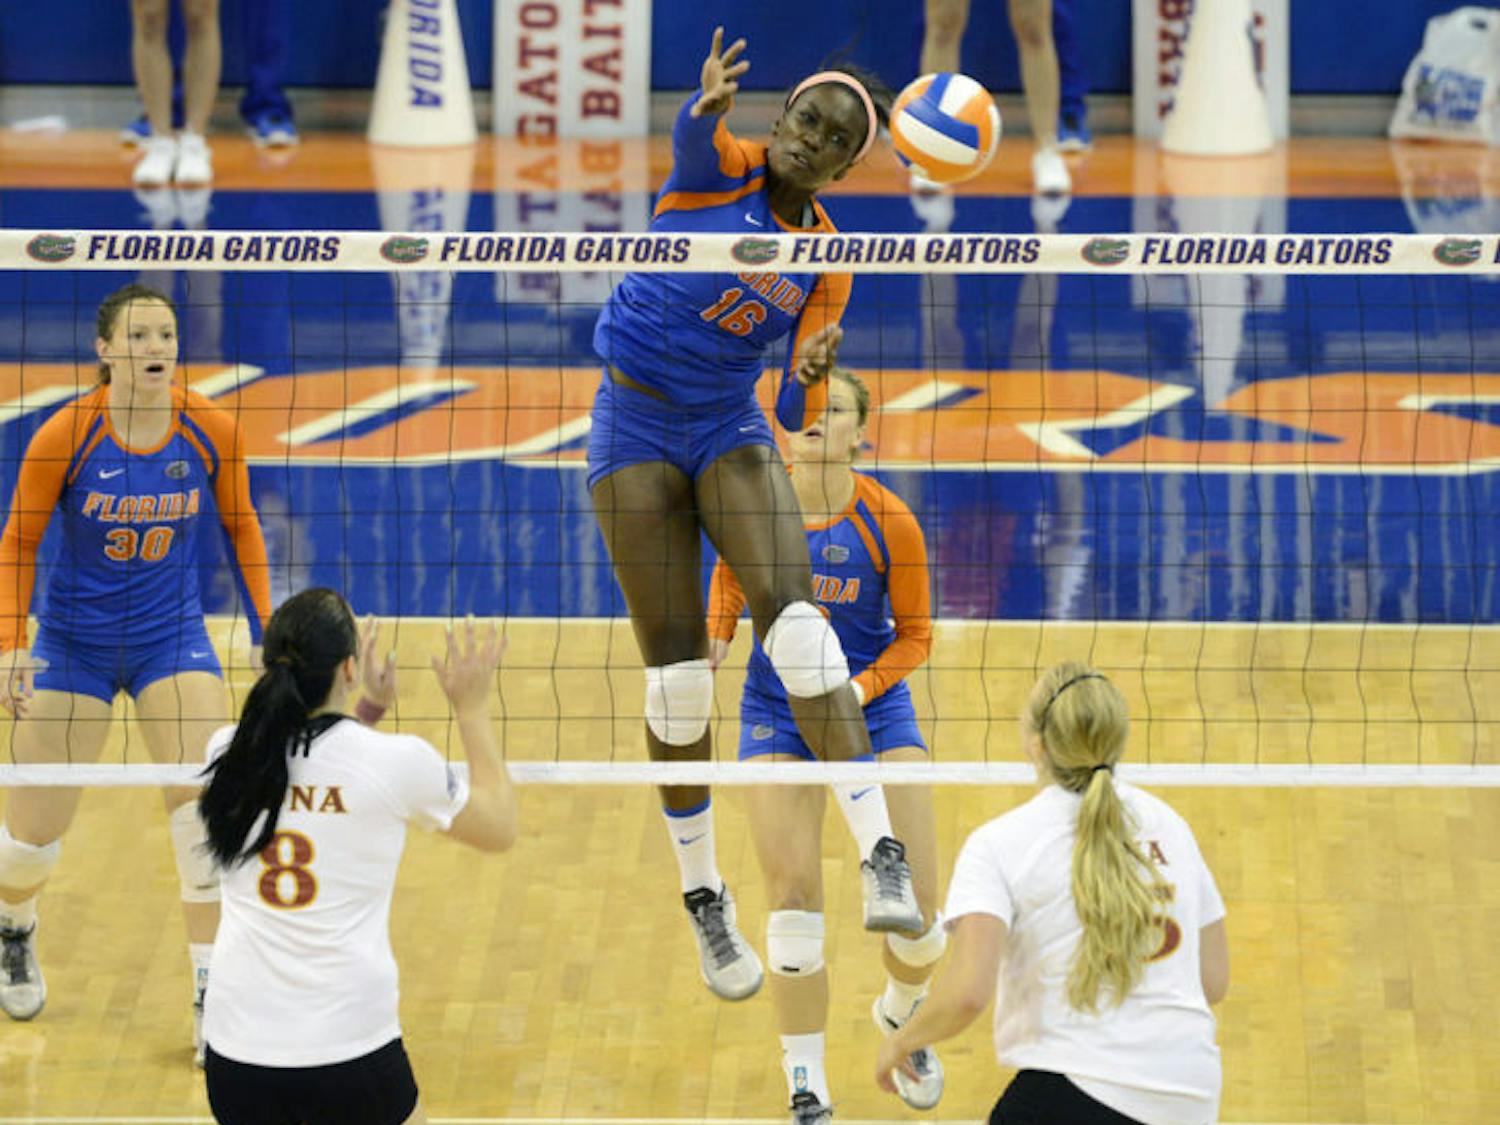 Sophomore middle blocker Simone Antwi (16) jumps to block the ball during Florida’s three-set win against Iona on Sept. 14 in the O’Connell Center.